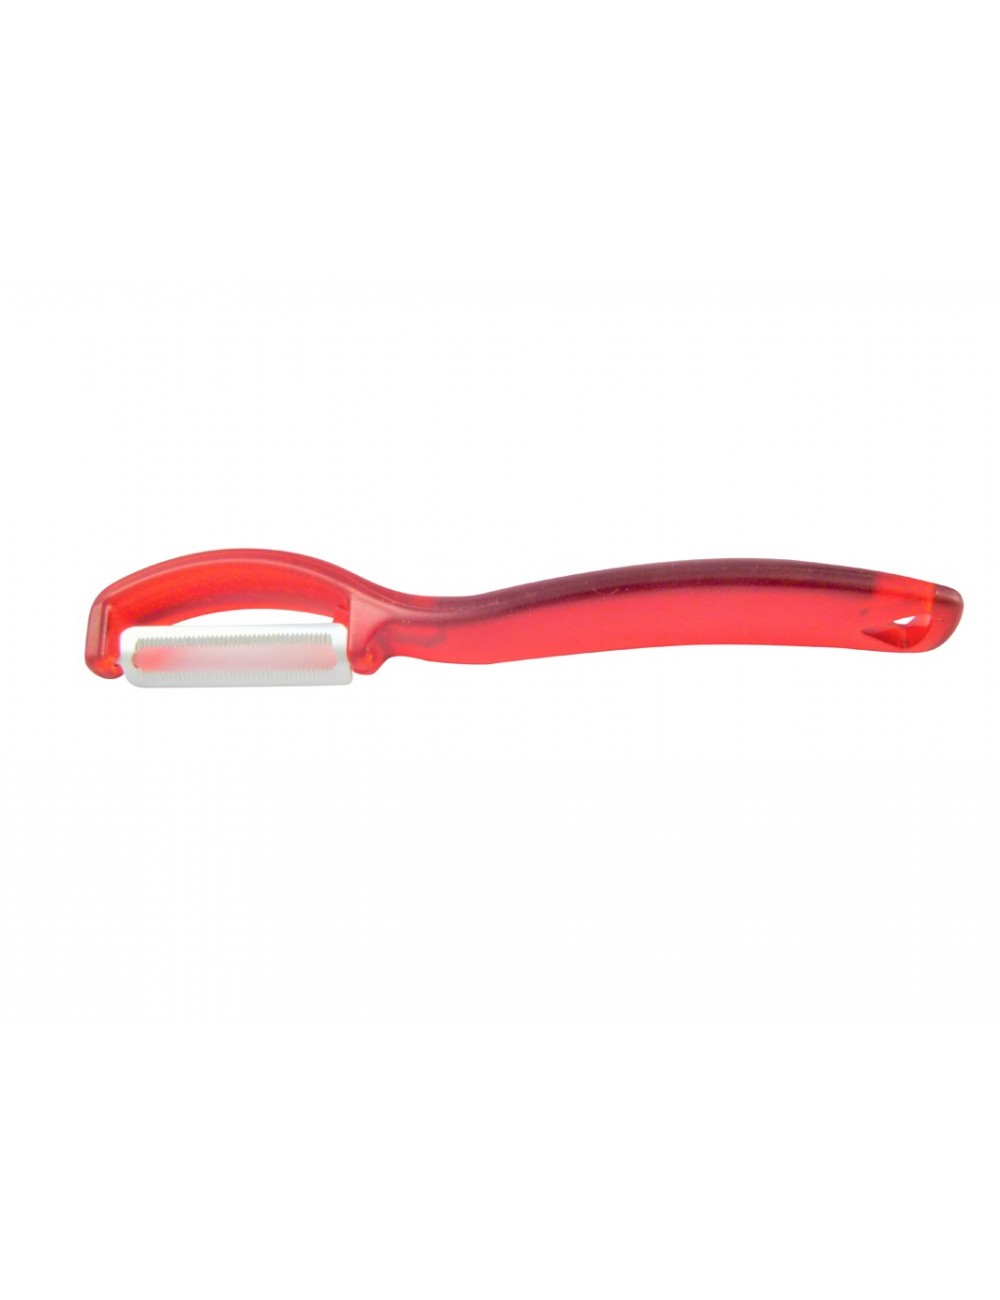 PEELER WITH MOBILE BLADE - RED HANDLE - PURCHASE OF KITCHEN UTENSILS